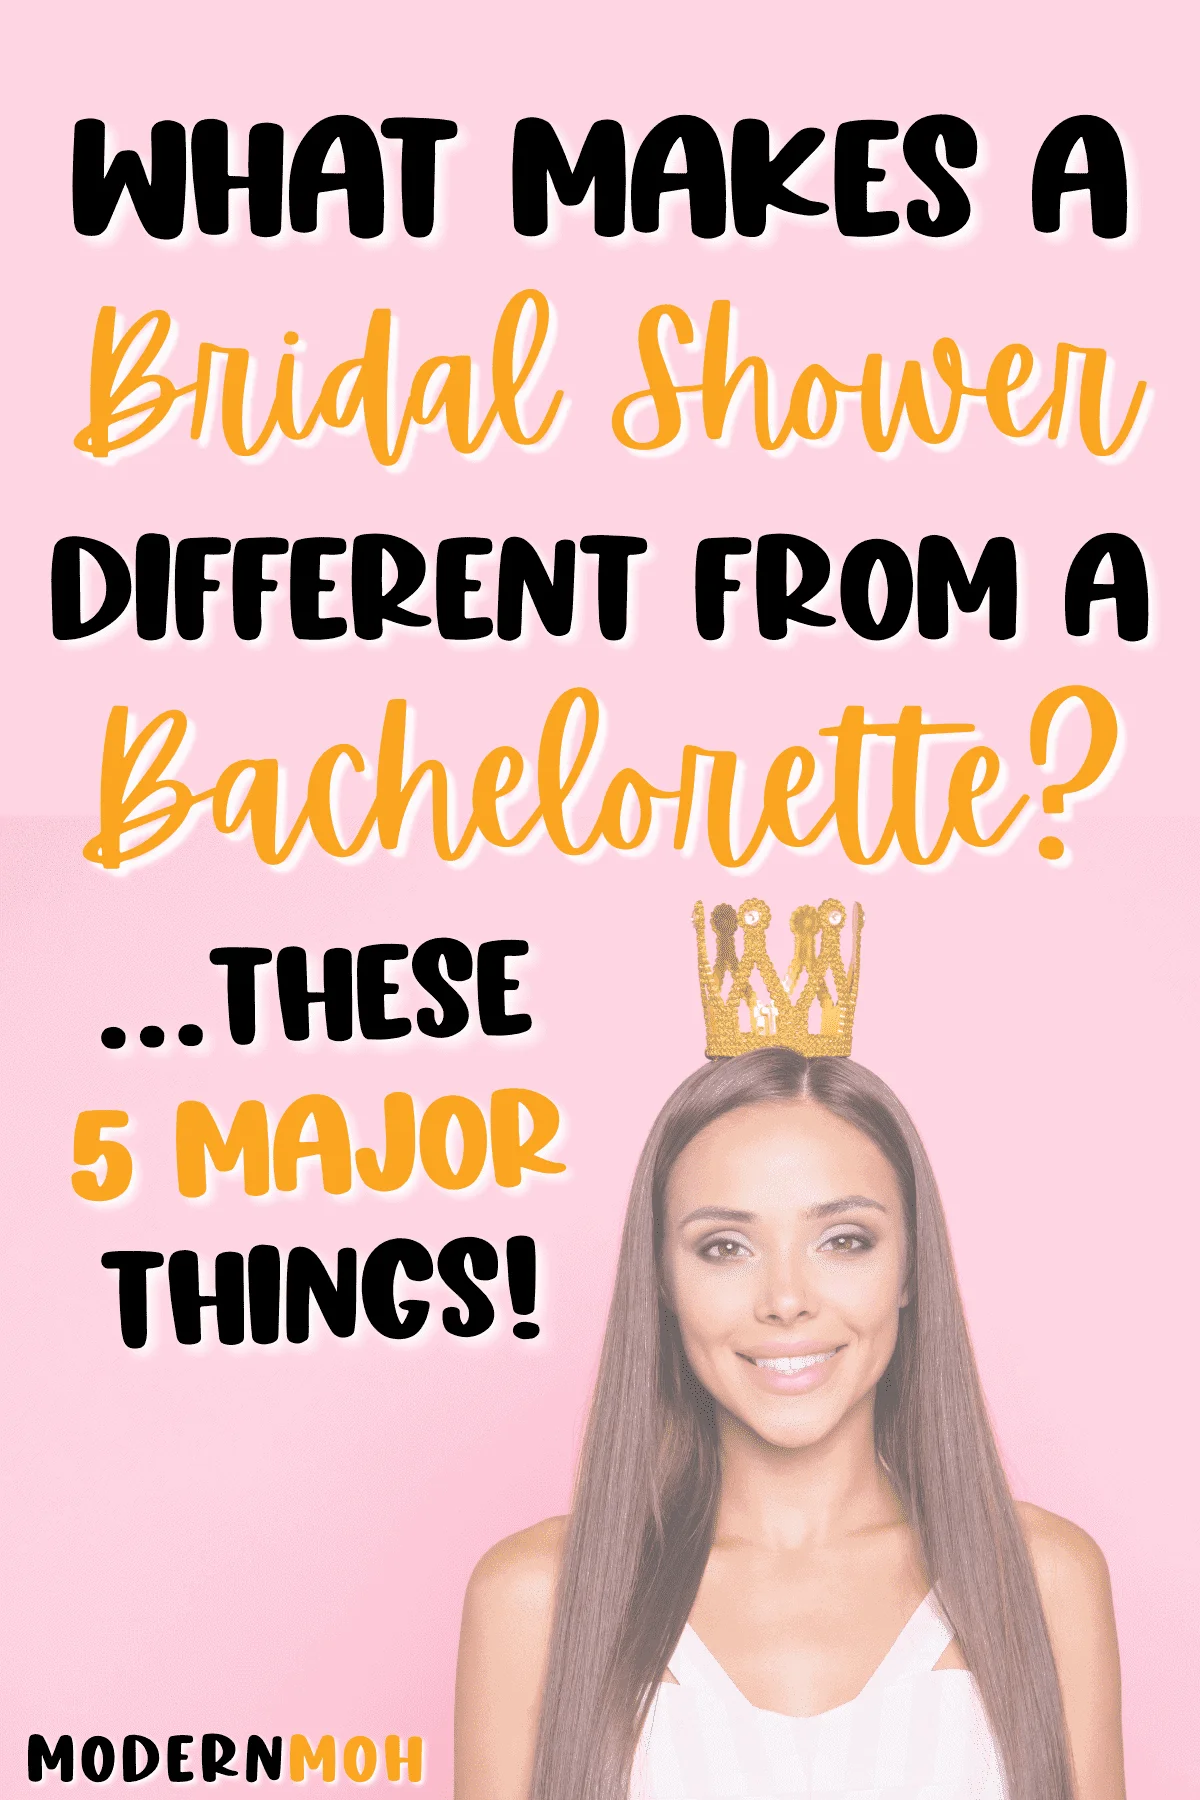 Bridal Shower vs Bachelorette Party: What’s the Difference?